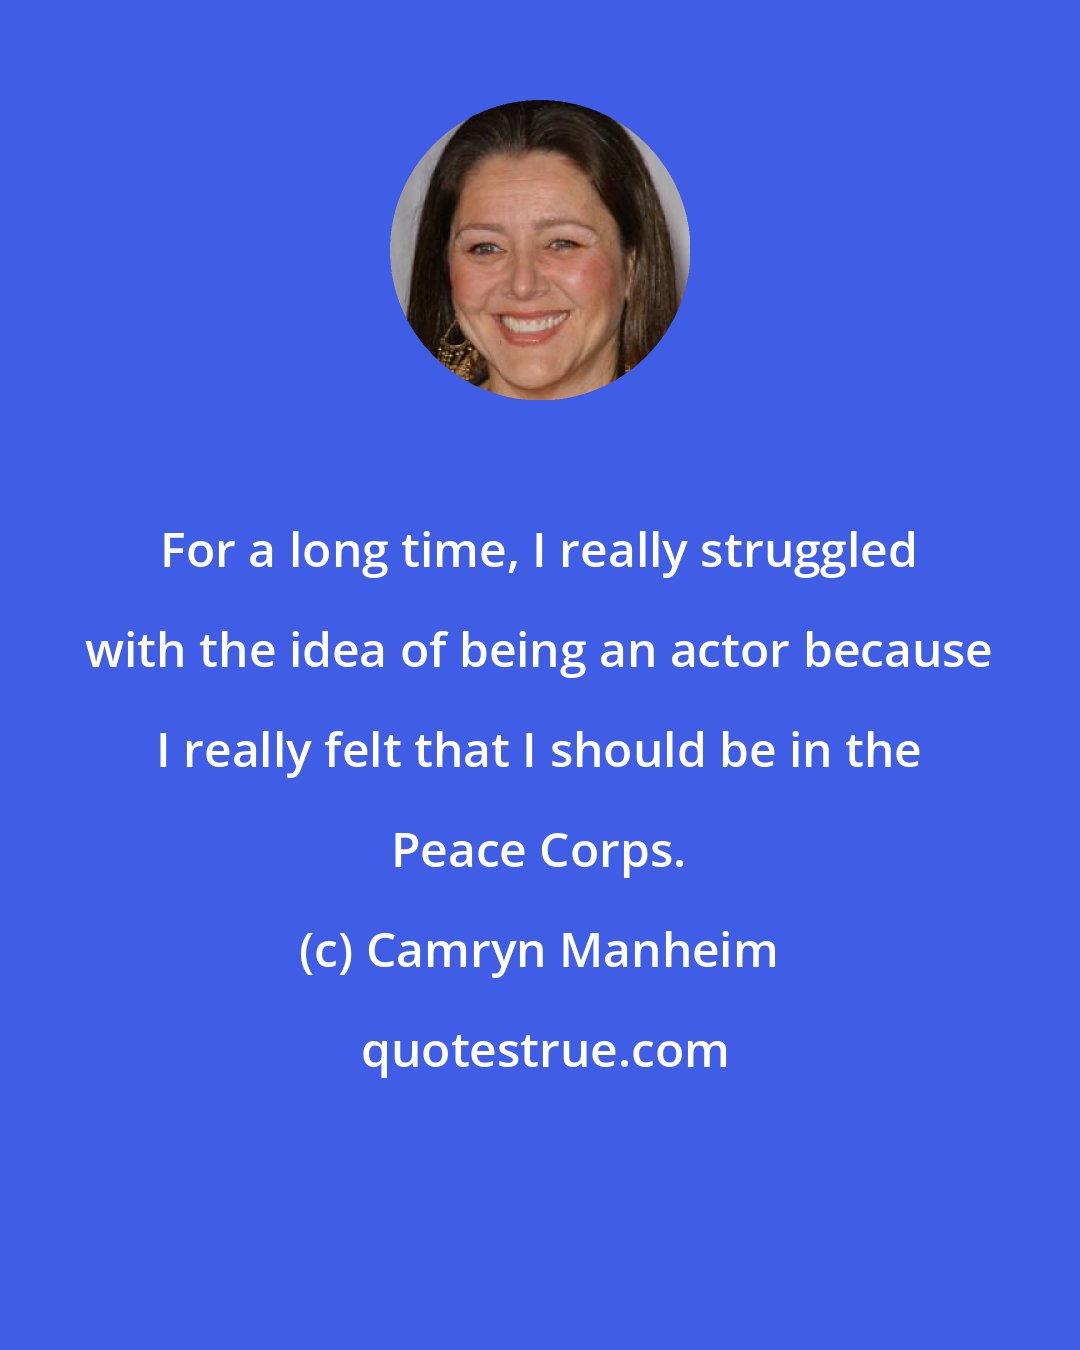 Camryn Manheim: For a long time, I really struggled with the idea of being an actor because I really felt that I should be in the Peace Corps.